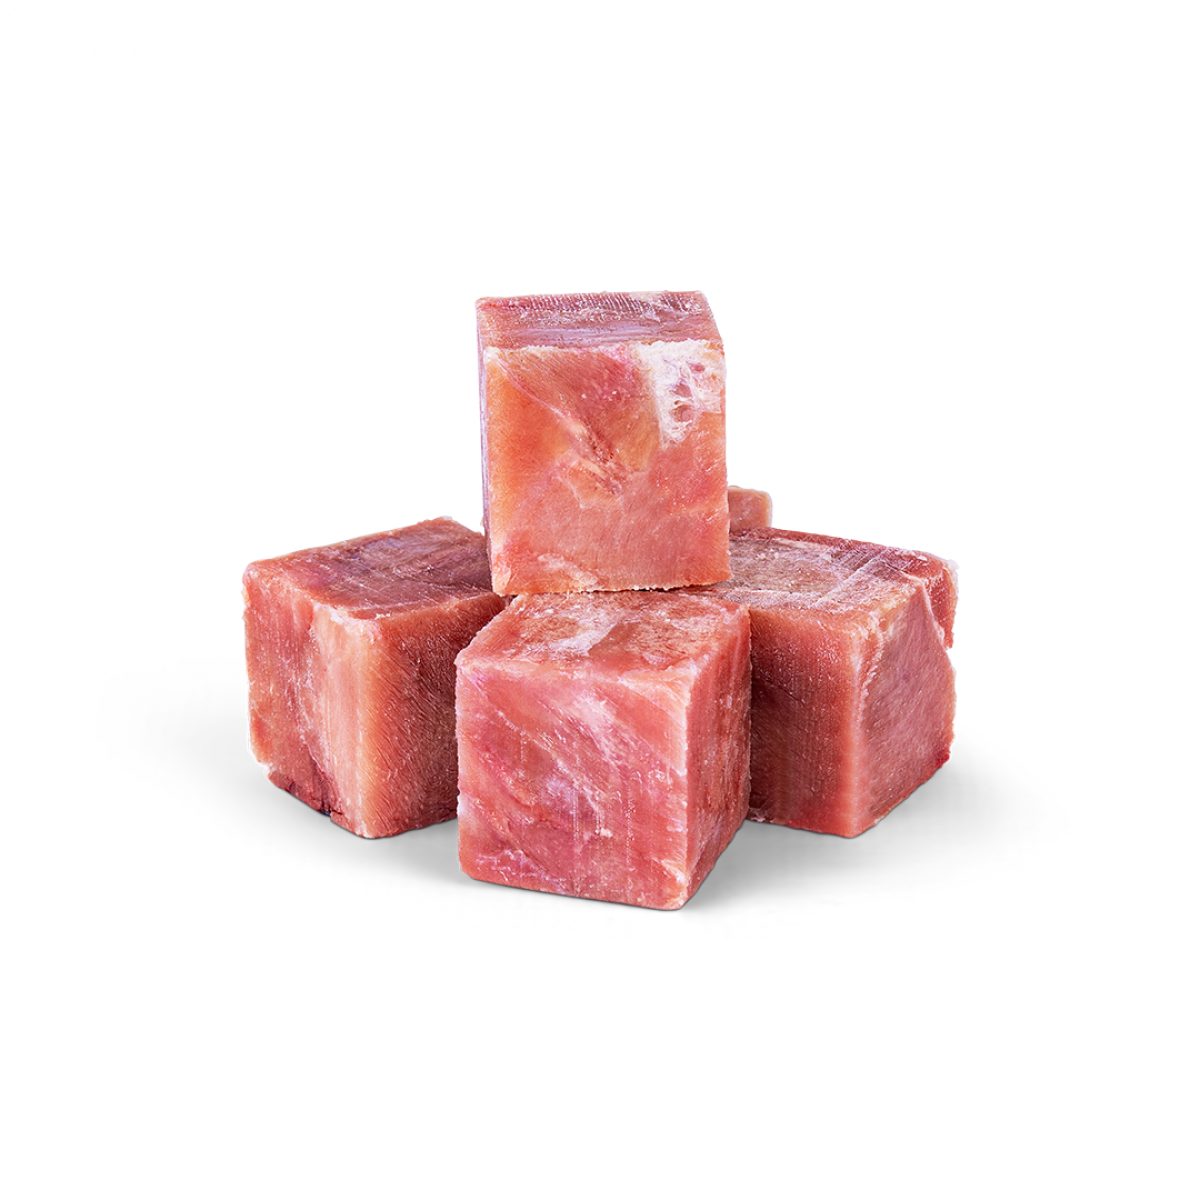 Veal Meat Cubes8454